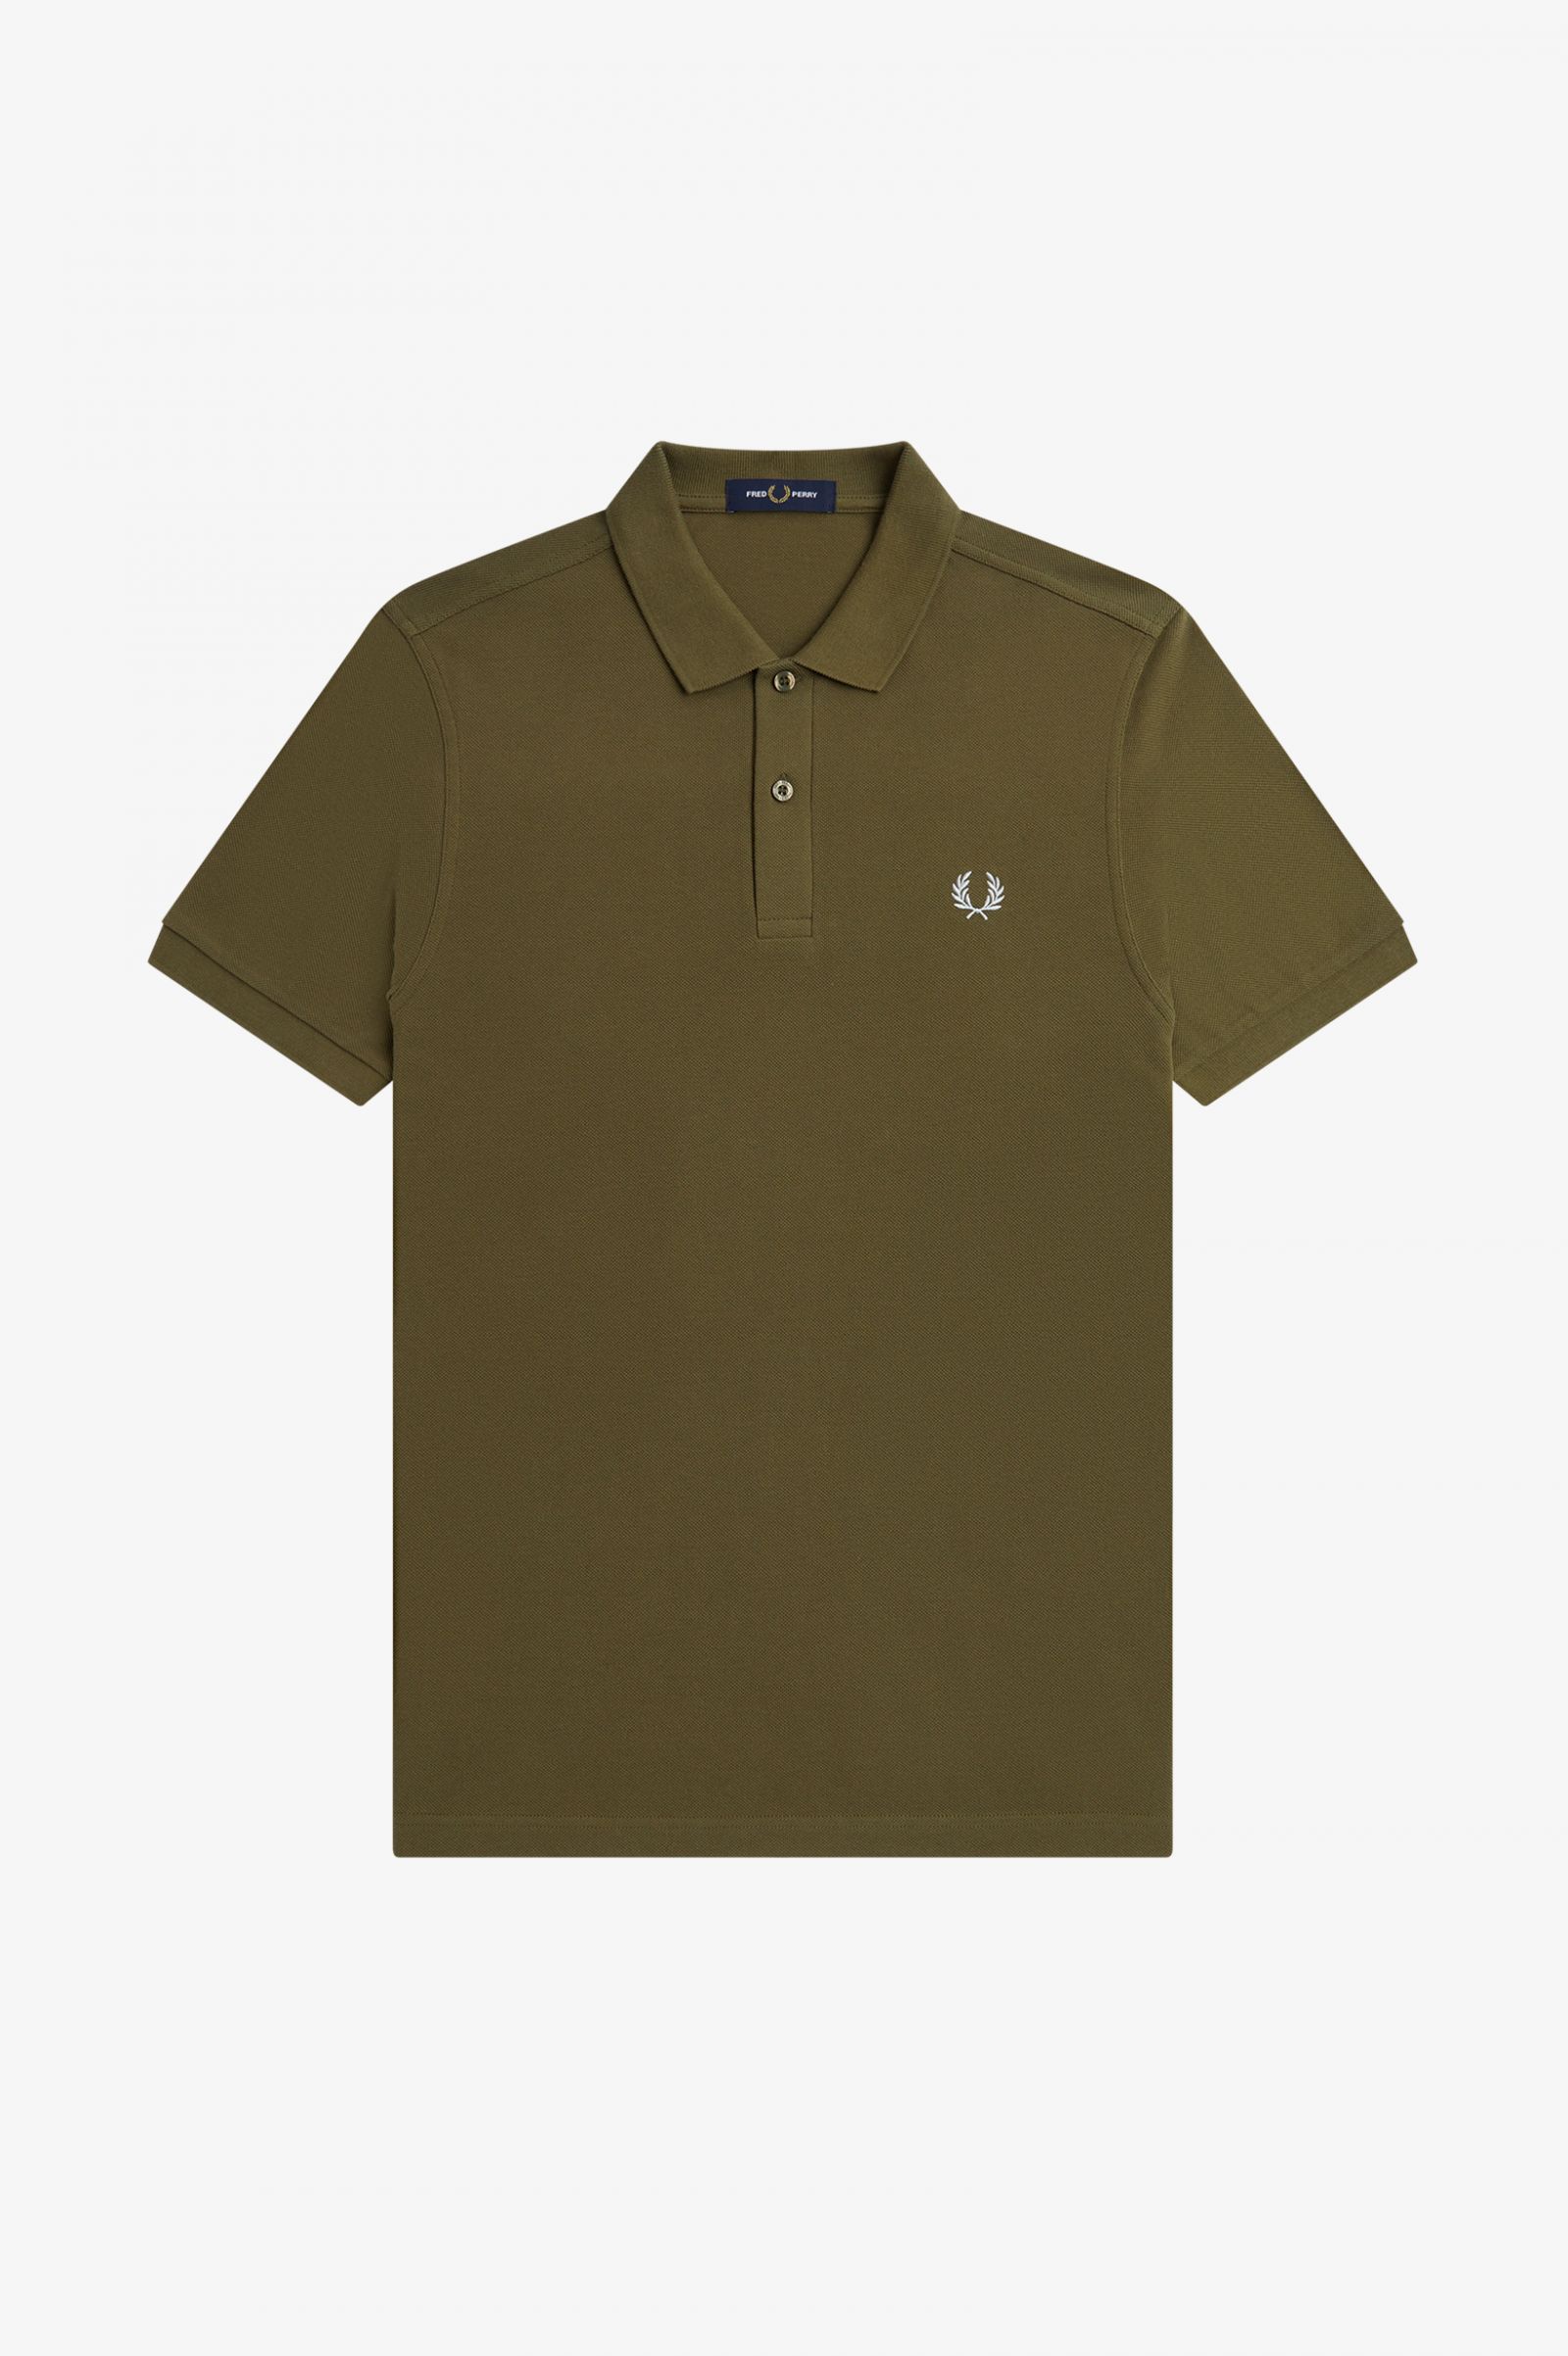 Fred Perry - The Fred Perry Shirt M6000